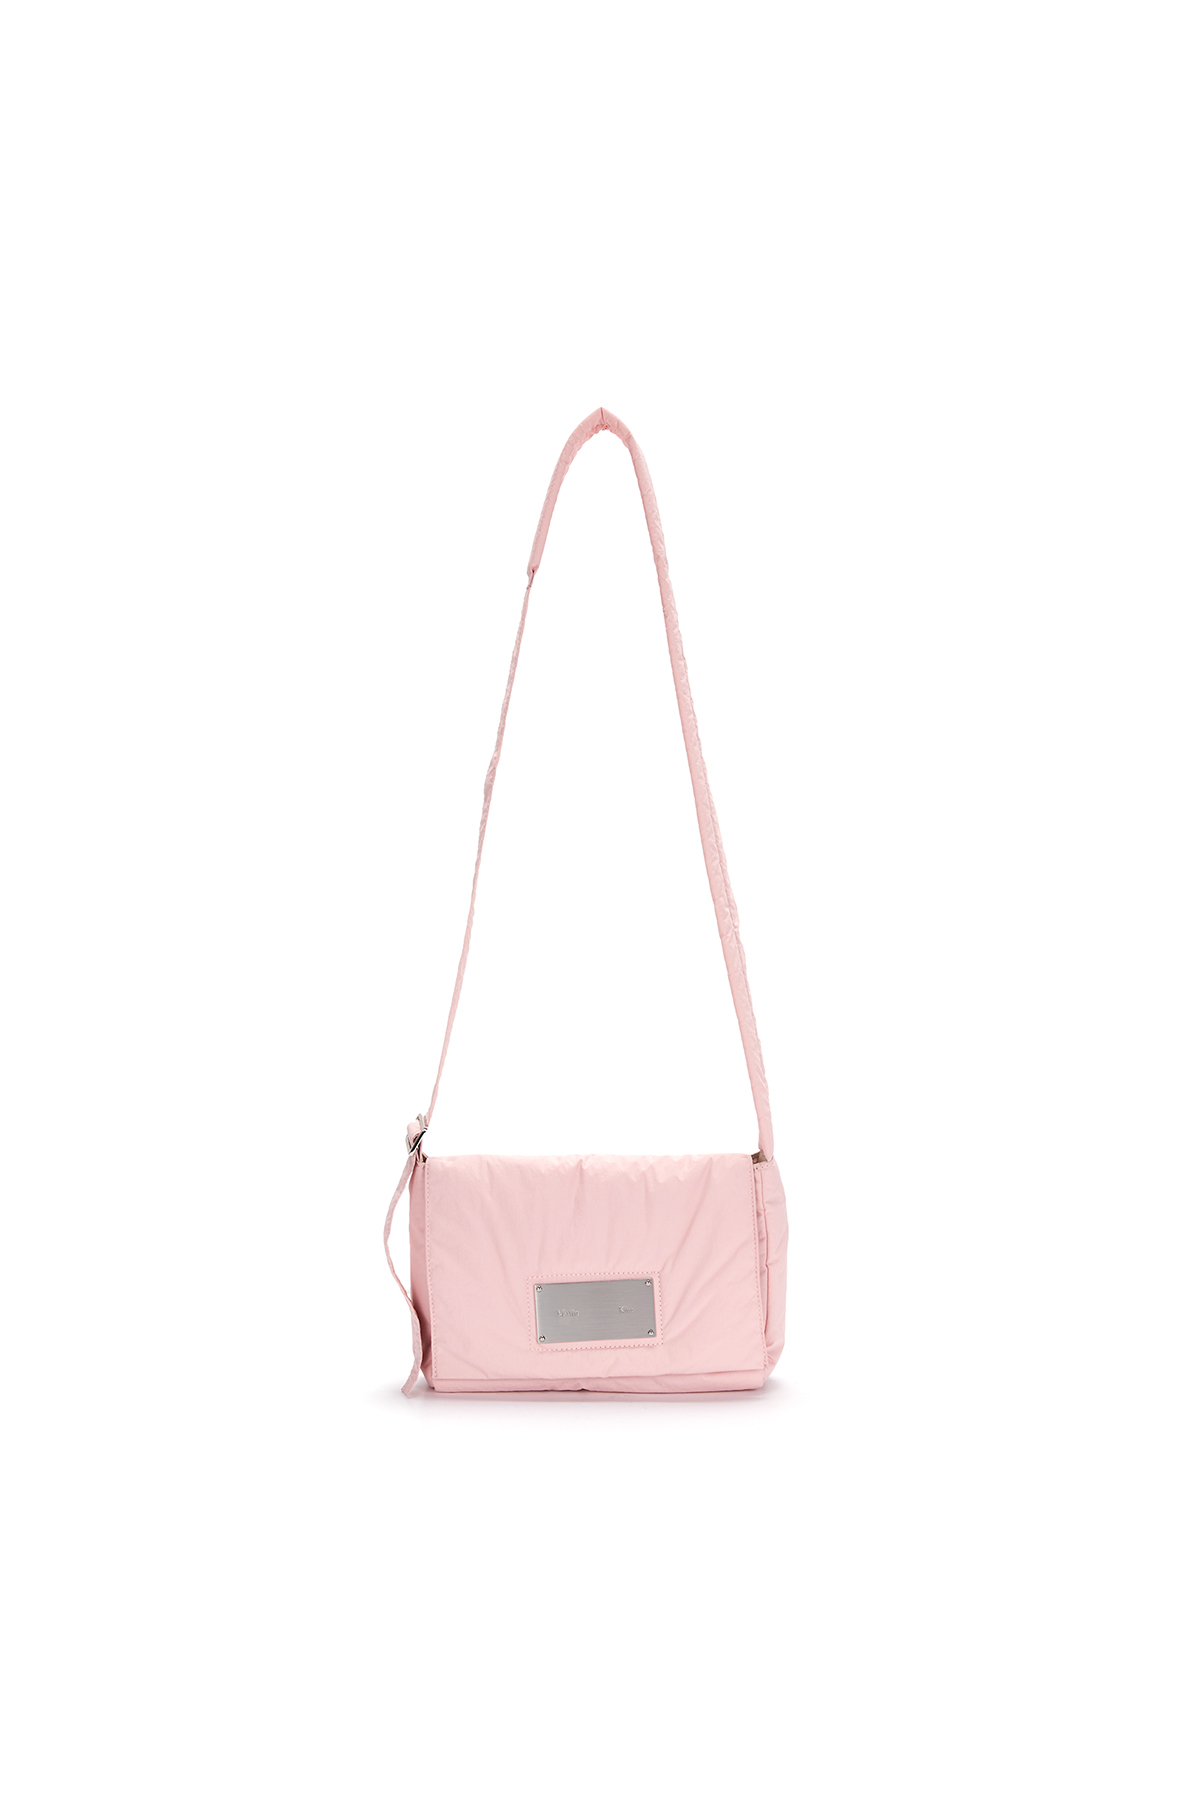 MIDDLE PADDING MESSENGER BAG IN PEACH